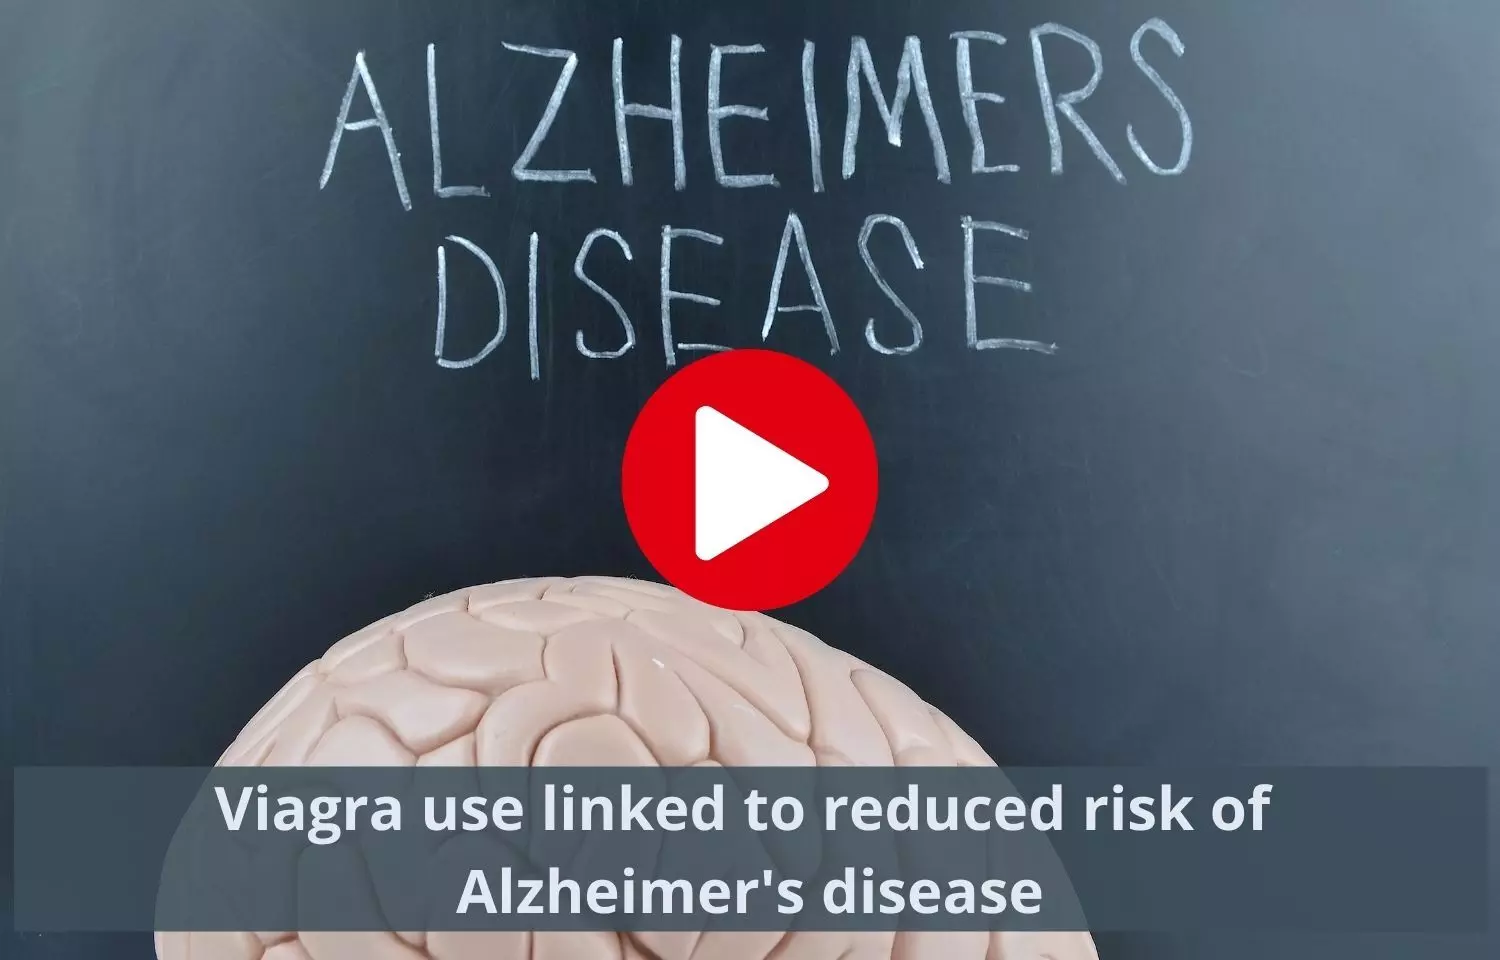 Viagra use tied to reduced Alzheimers disease risk